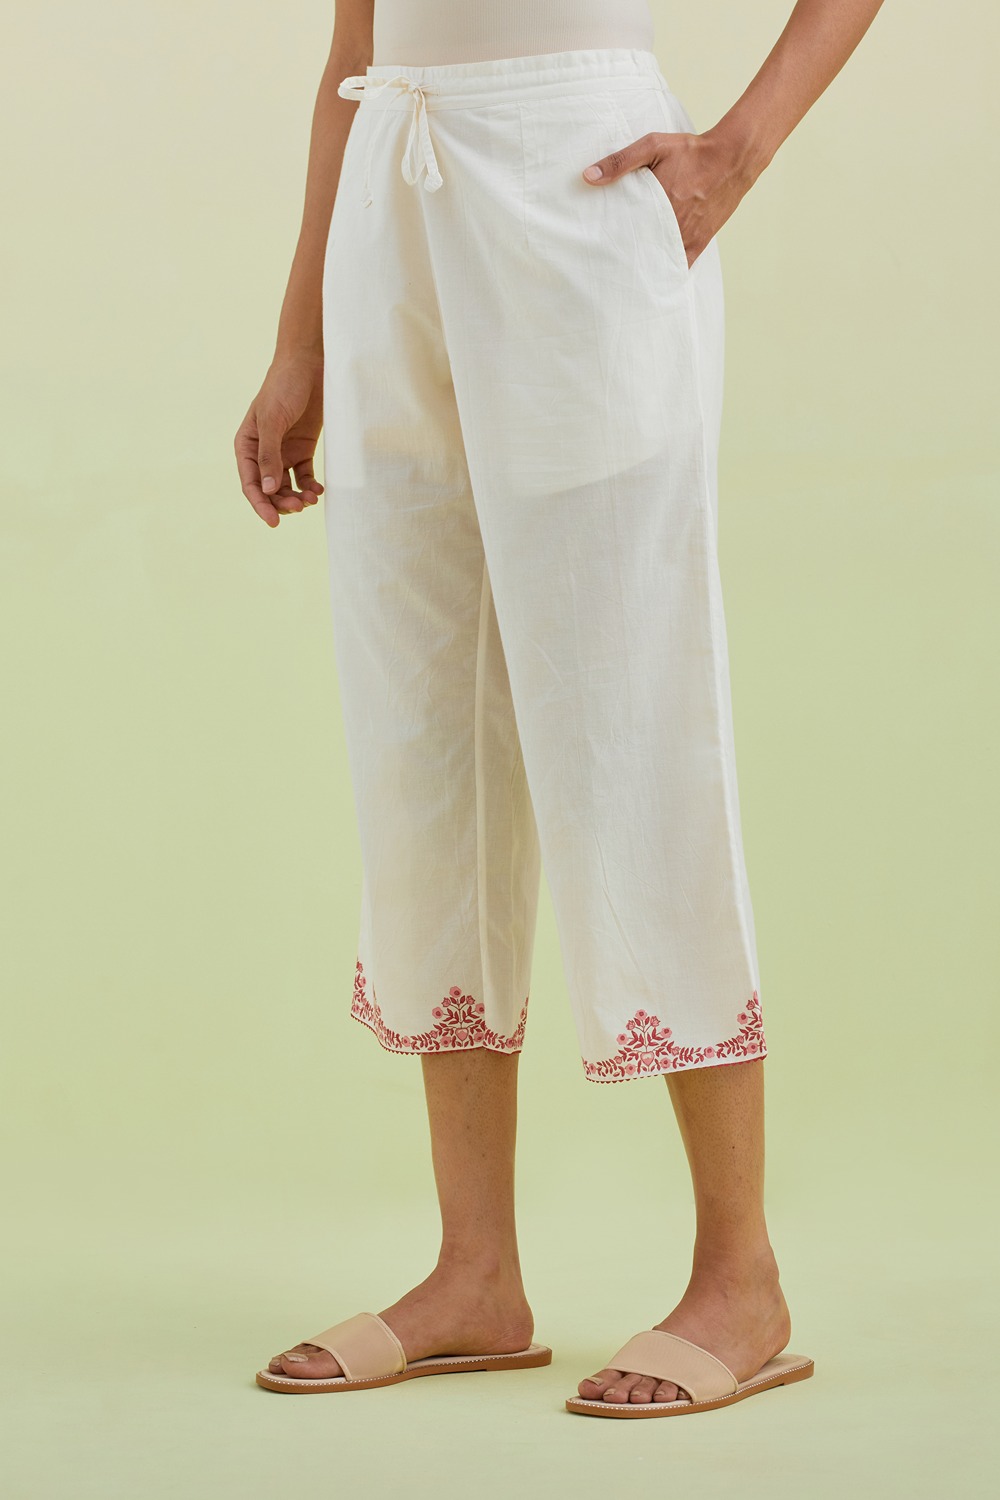 Off White Straight Ankle Length Pants With Pink Colored Hand-Block Printed Border At Hem